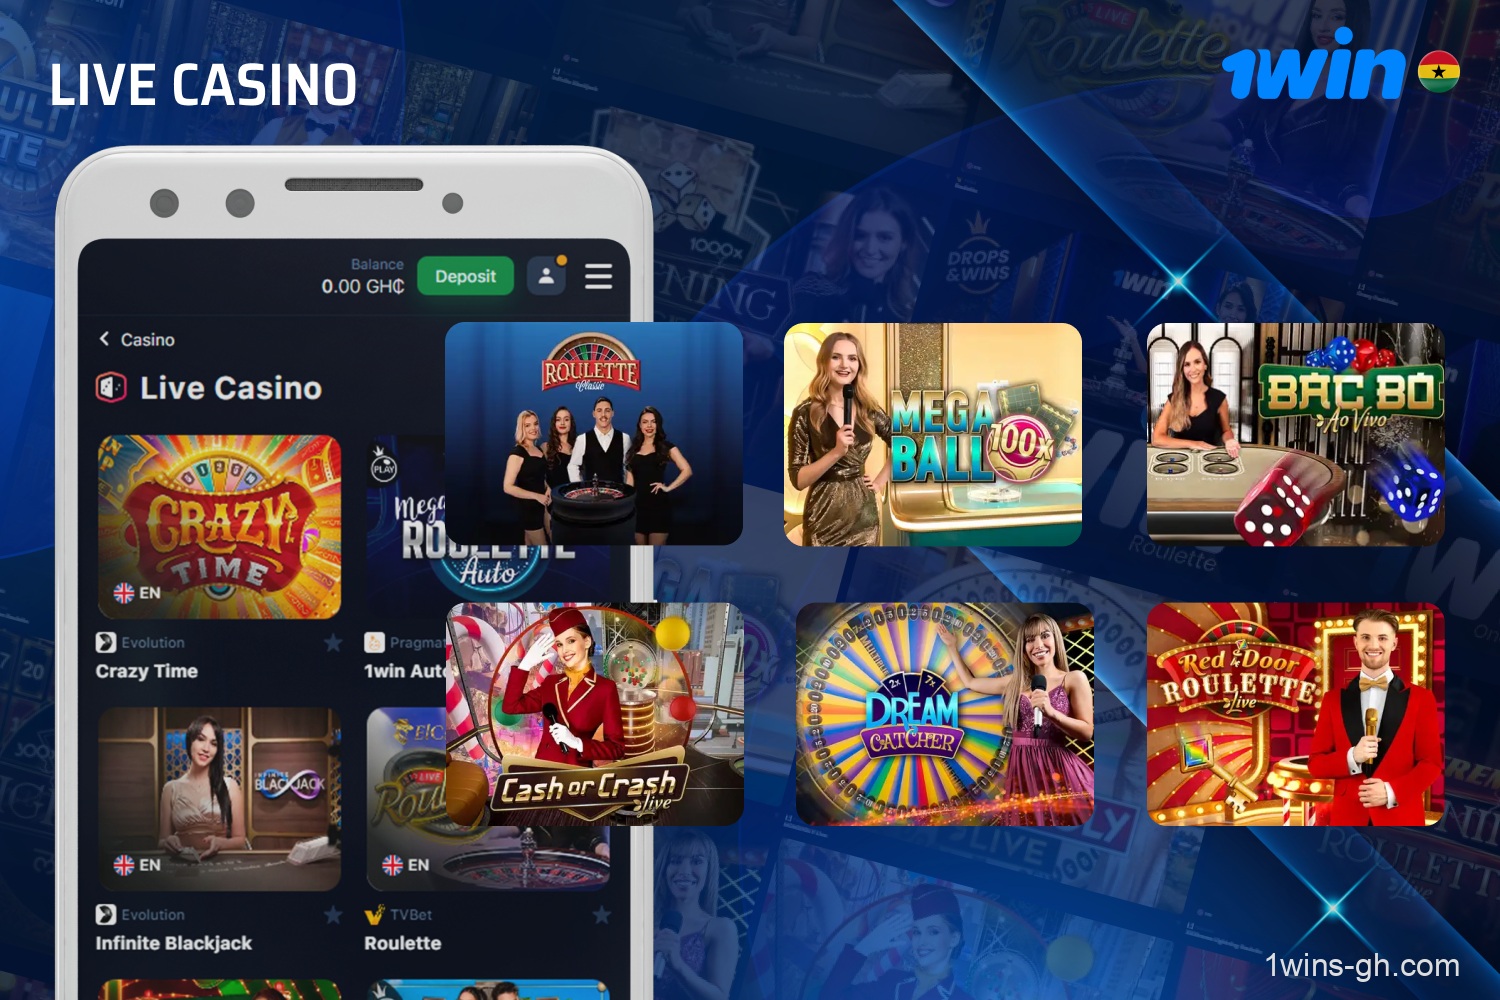 To access live dealer games, Ghanaian players need to click on the Live Casino tab in the top navigation menu of the 1win platform